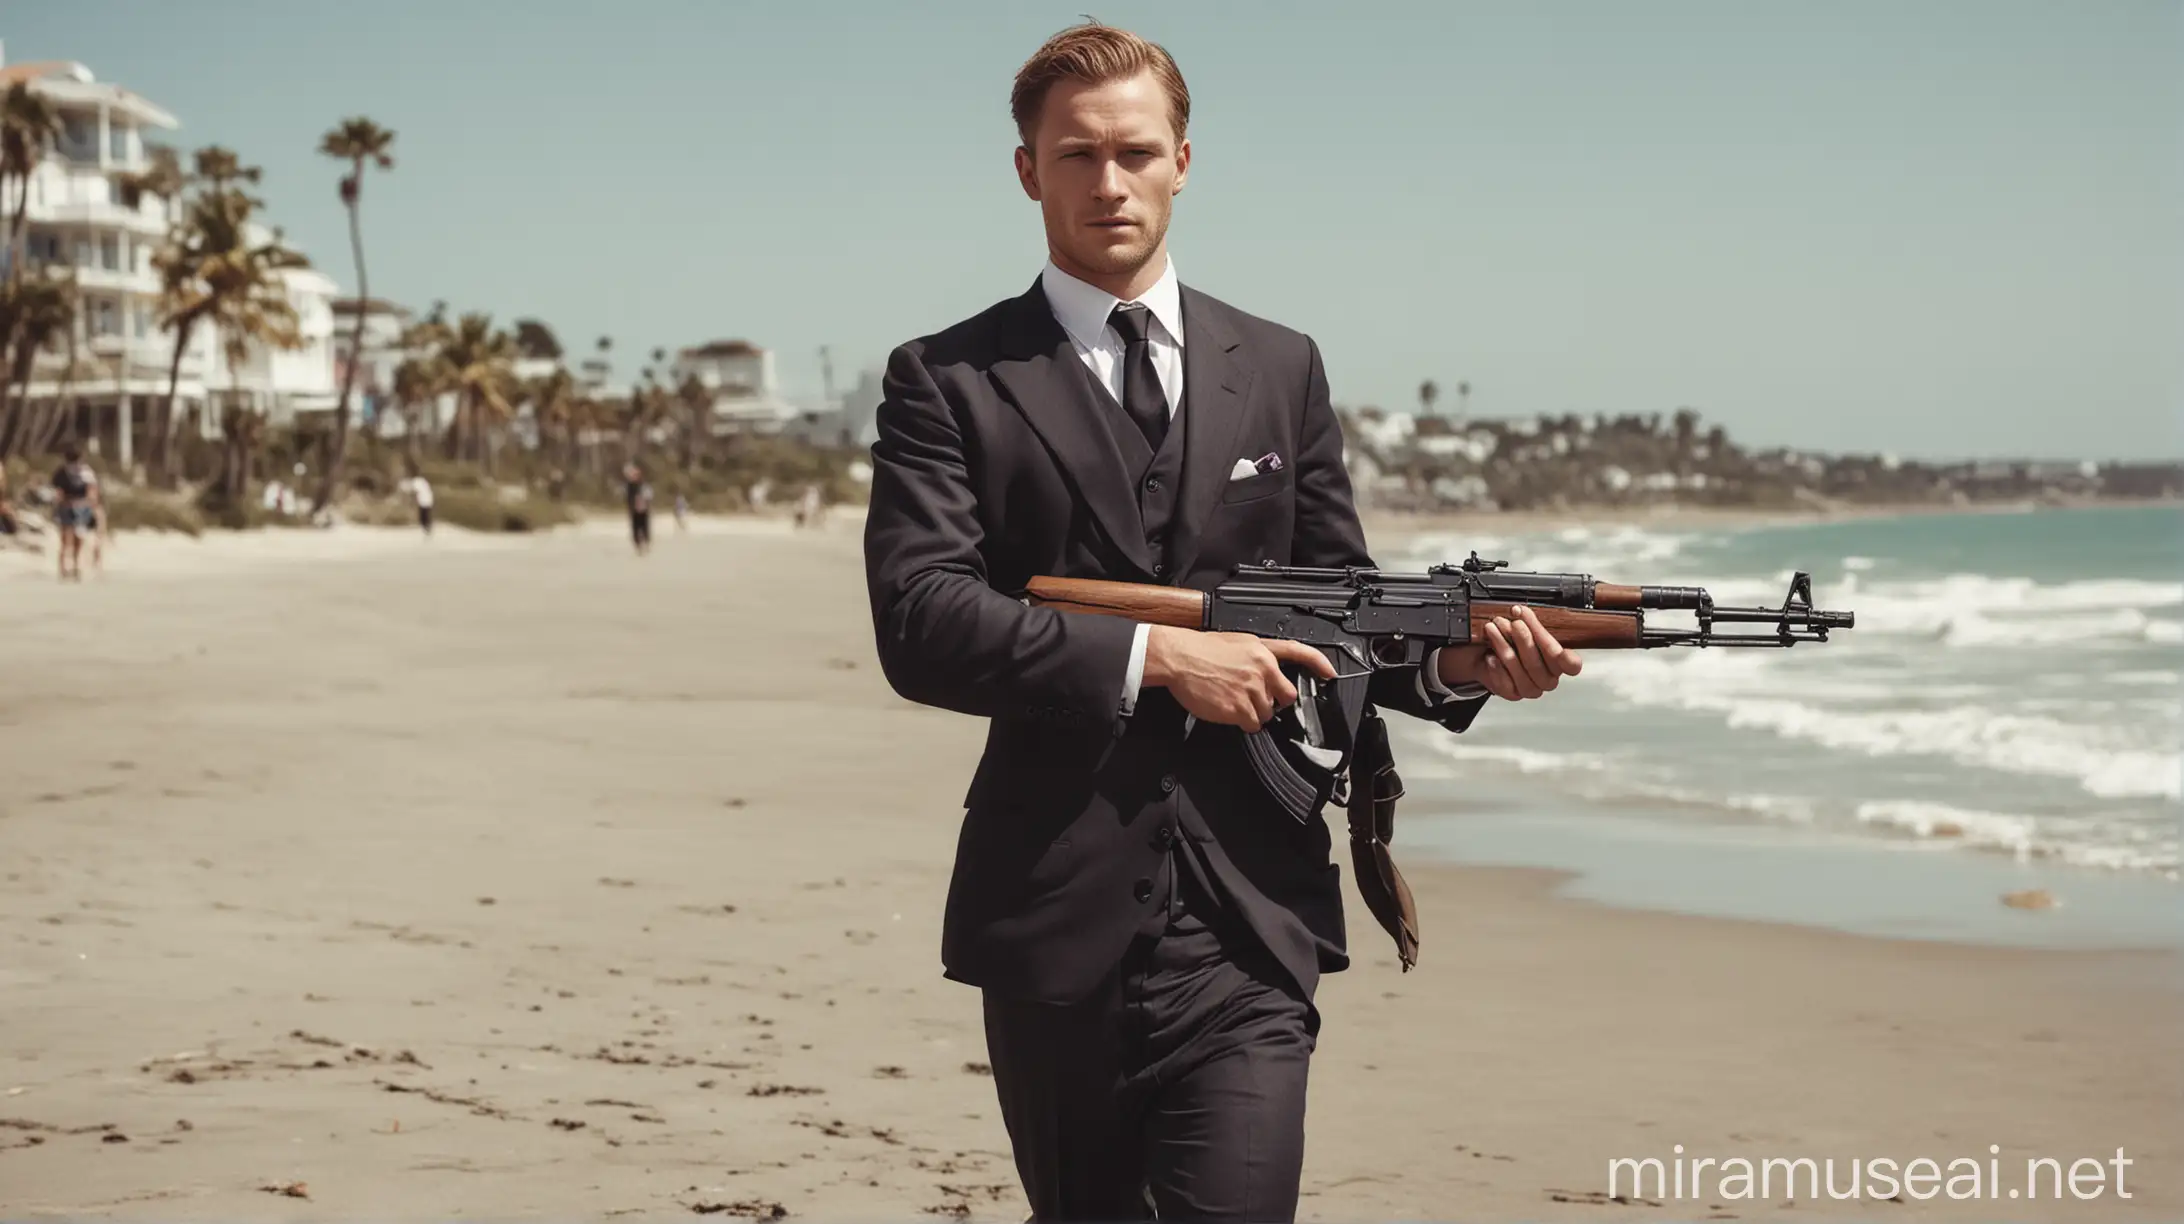 British Man in Suit Carrying AK47 at Beach